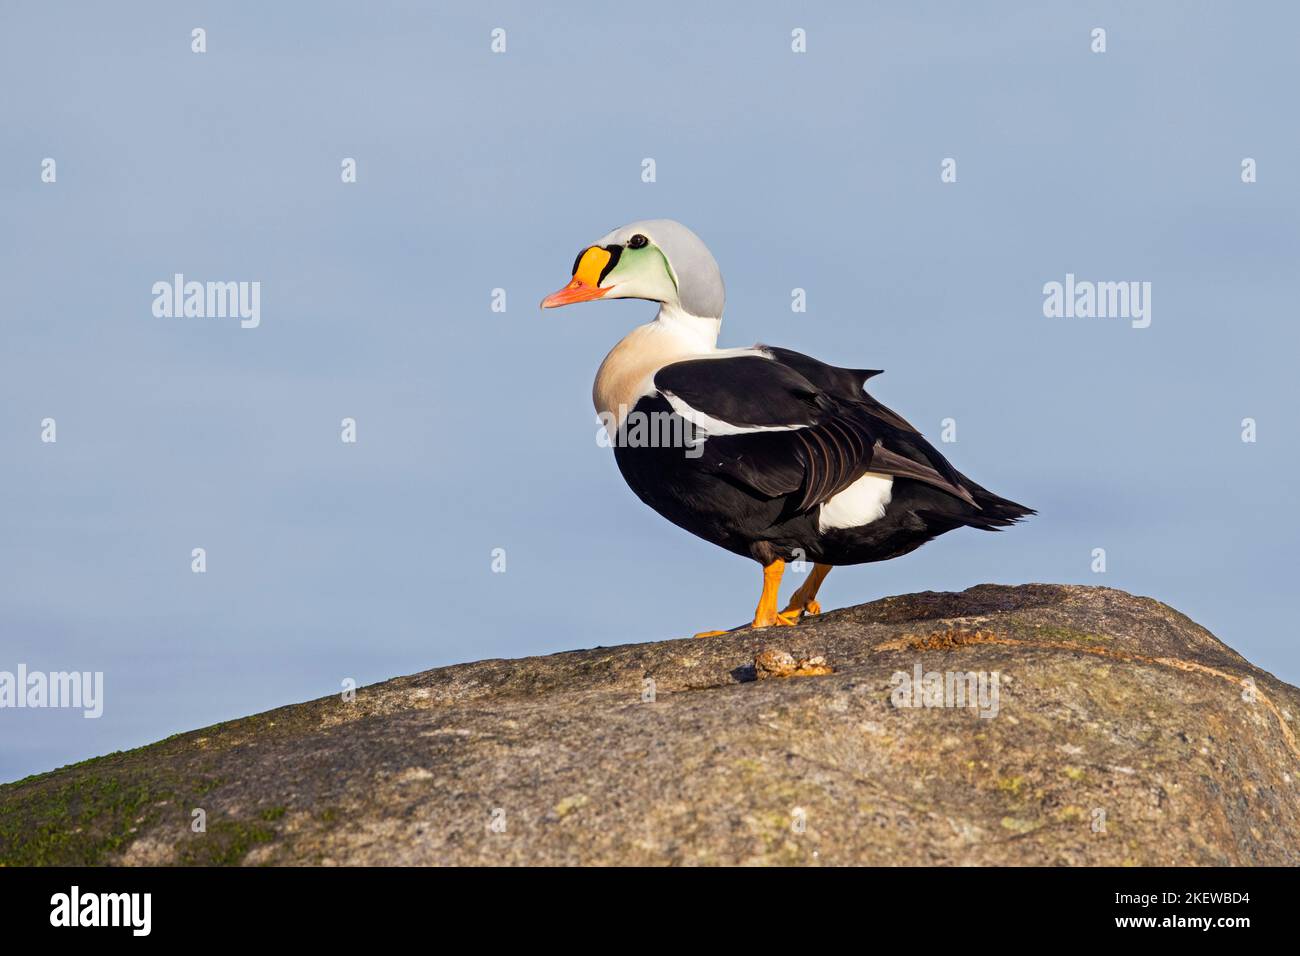 King eider (Somateria spectabilis) male sea duck in breeding plumage resting on rock in the Baltic Sea in winter, Mecklenburg-Vorpommern, Germany Stock Photo